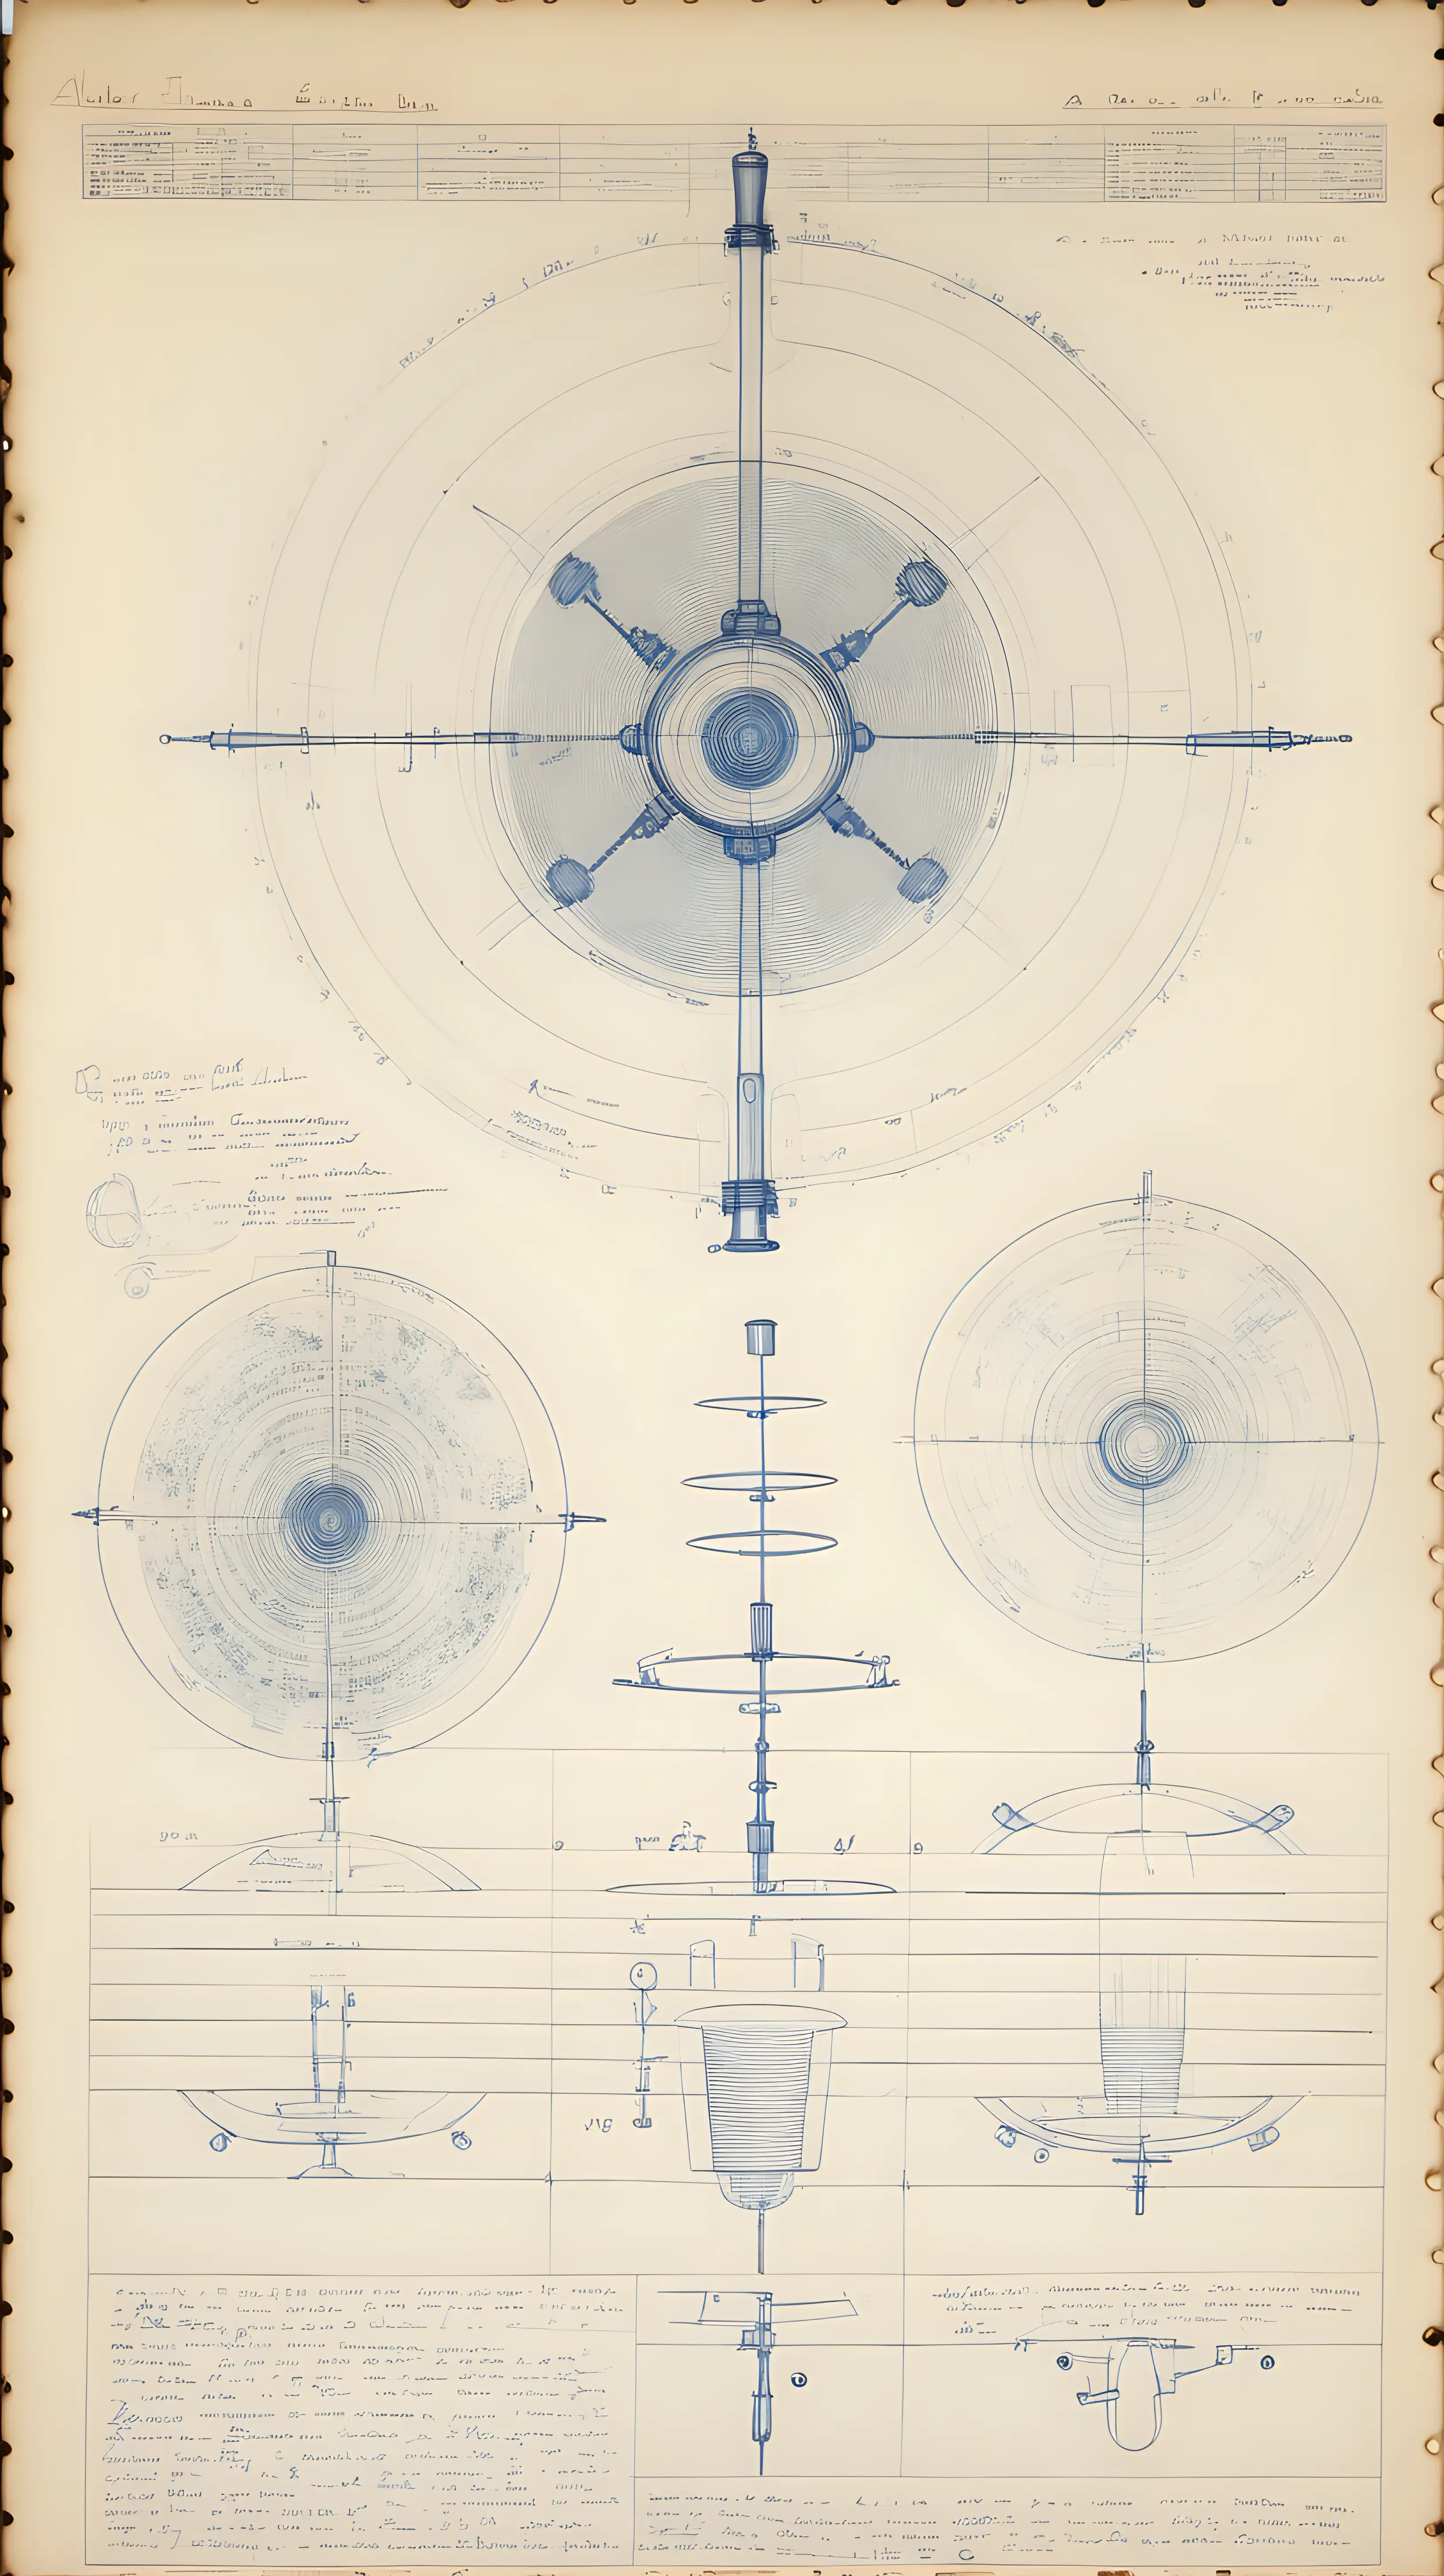 Albert Einsteins Detailed Blueprint of an Atomic Bomb with Sketches and Notes